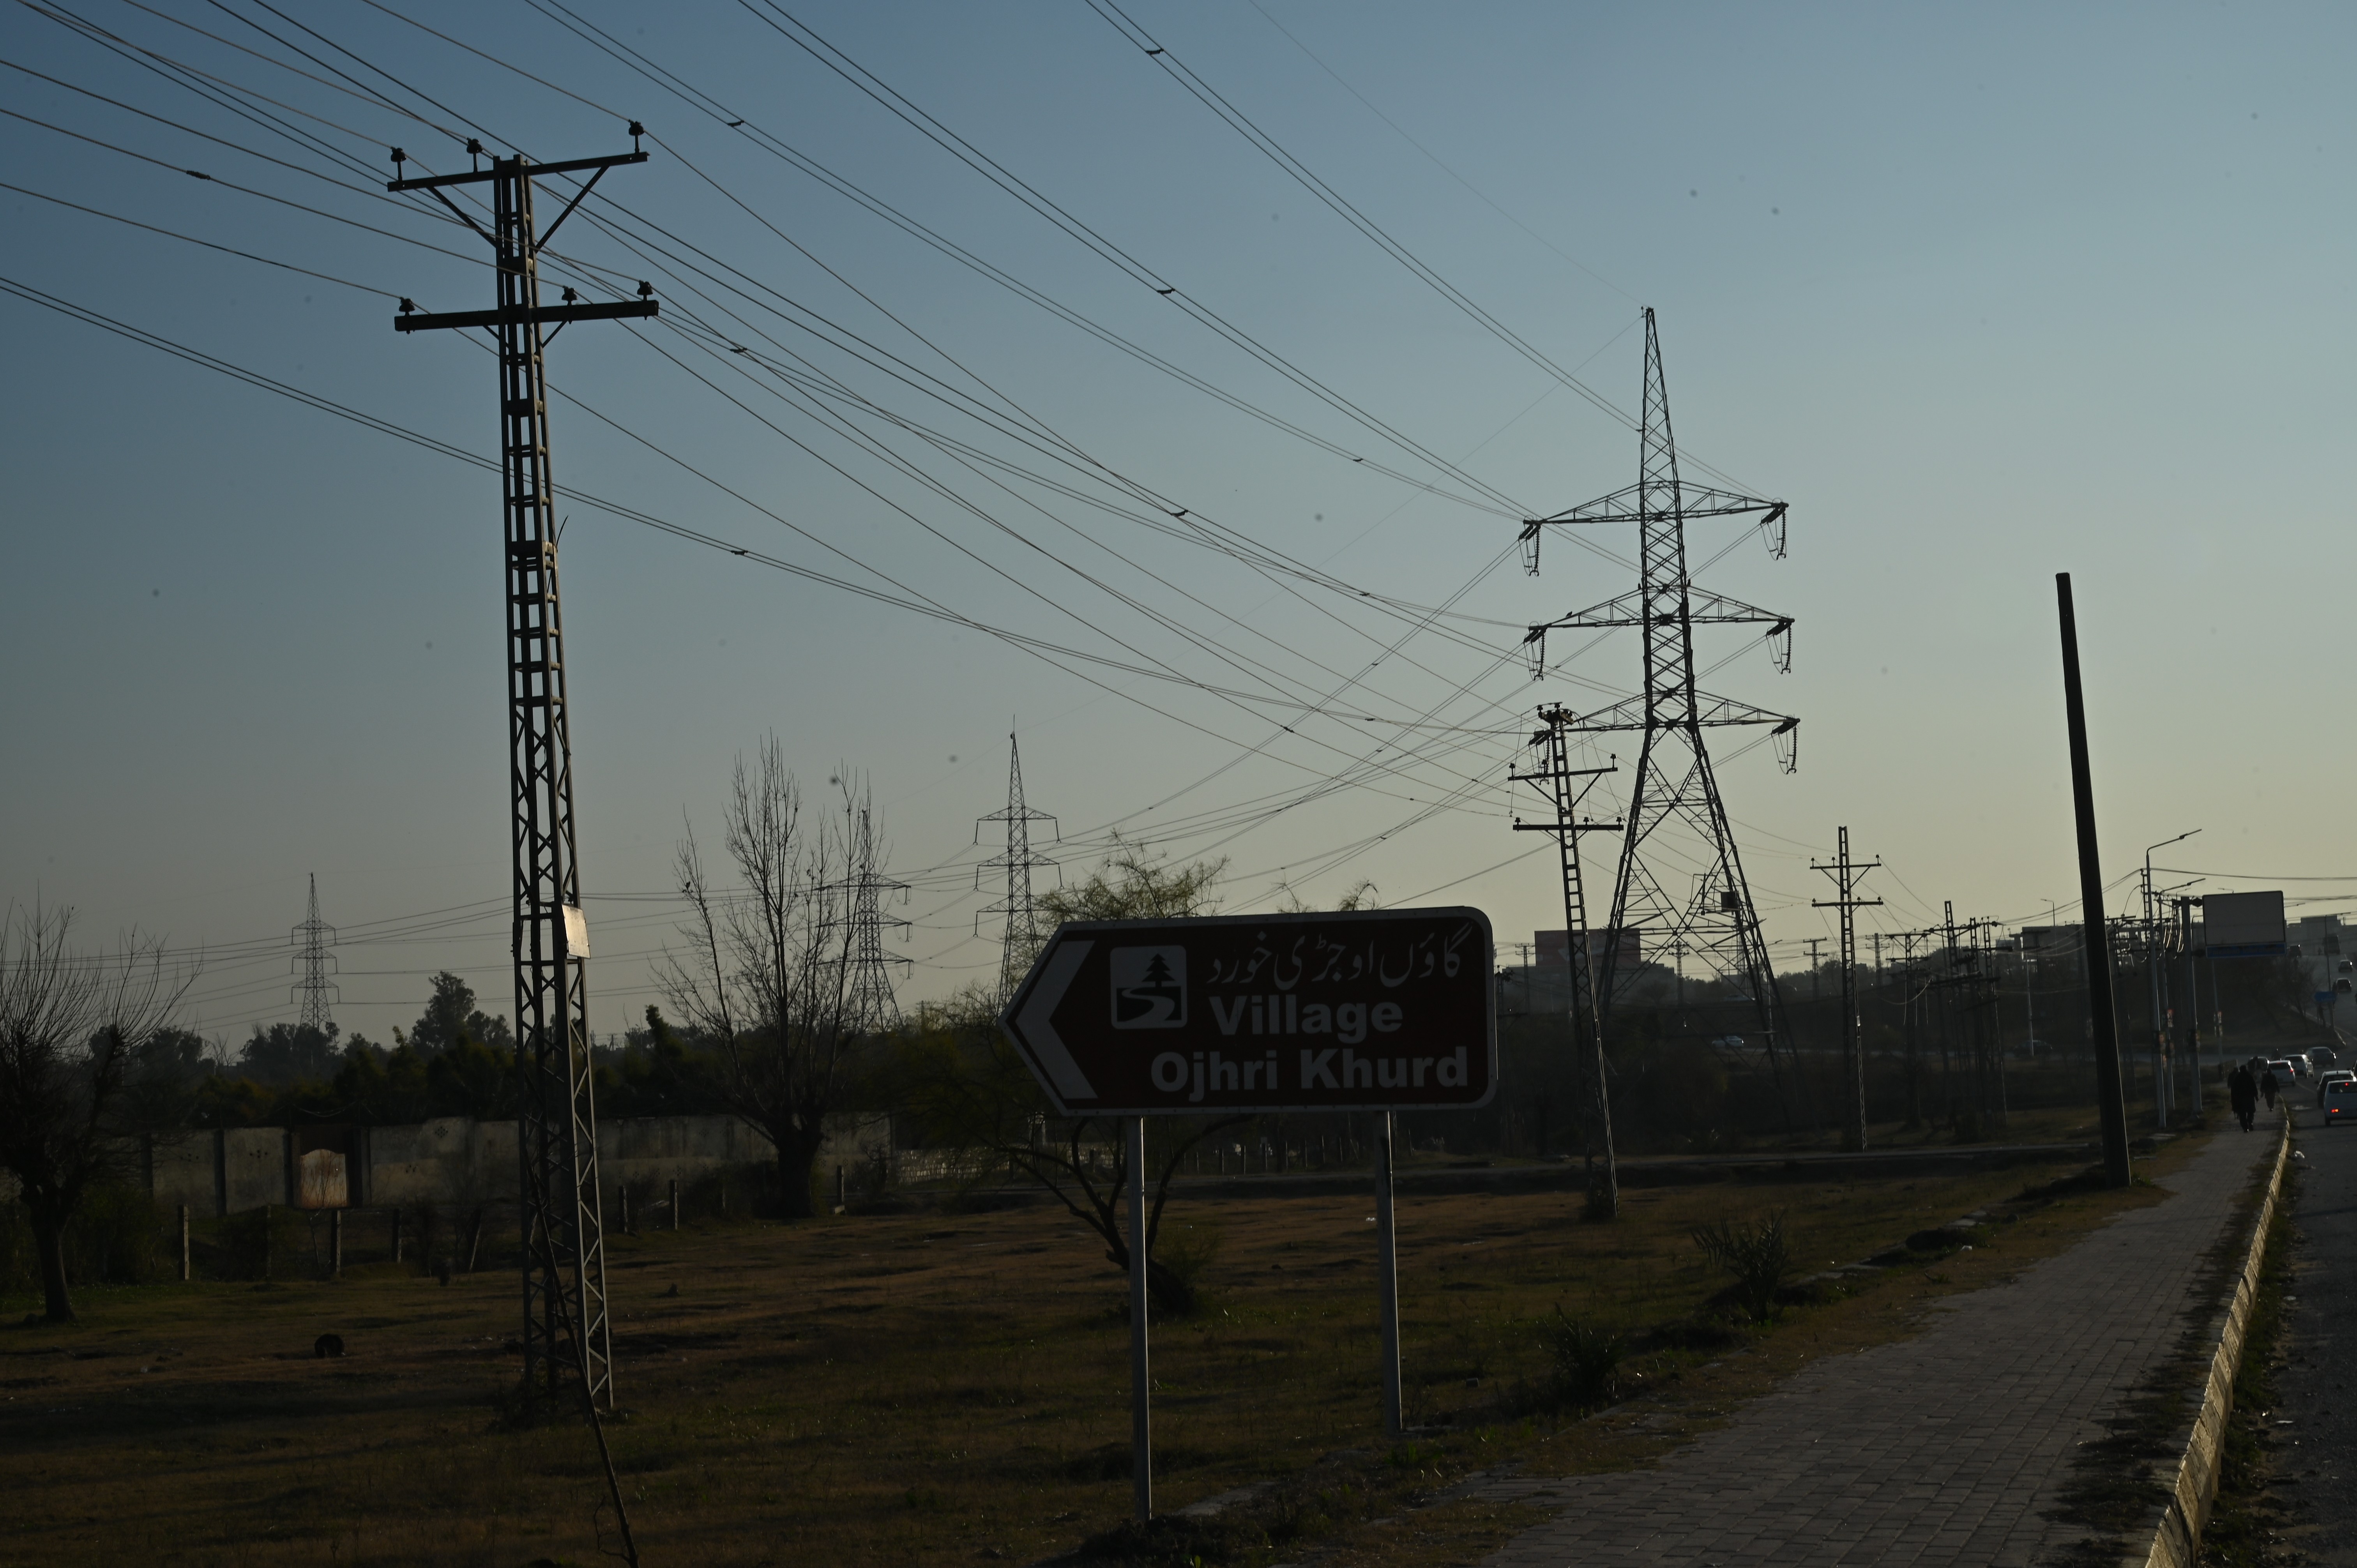 A direction board indicating the location of the village Ojhri Khurd